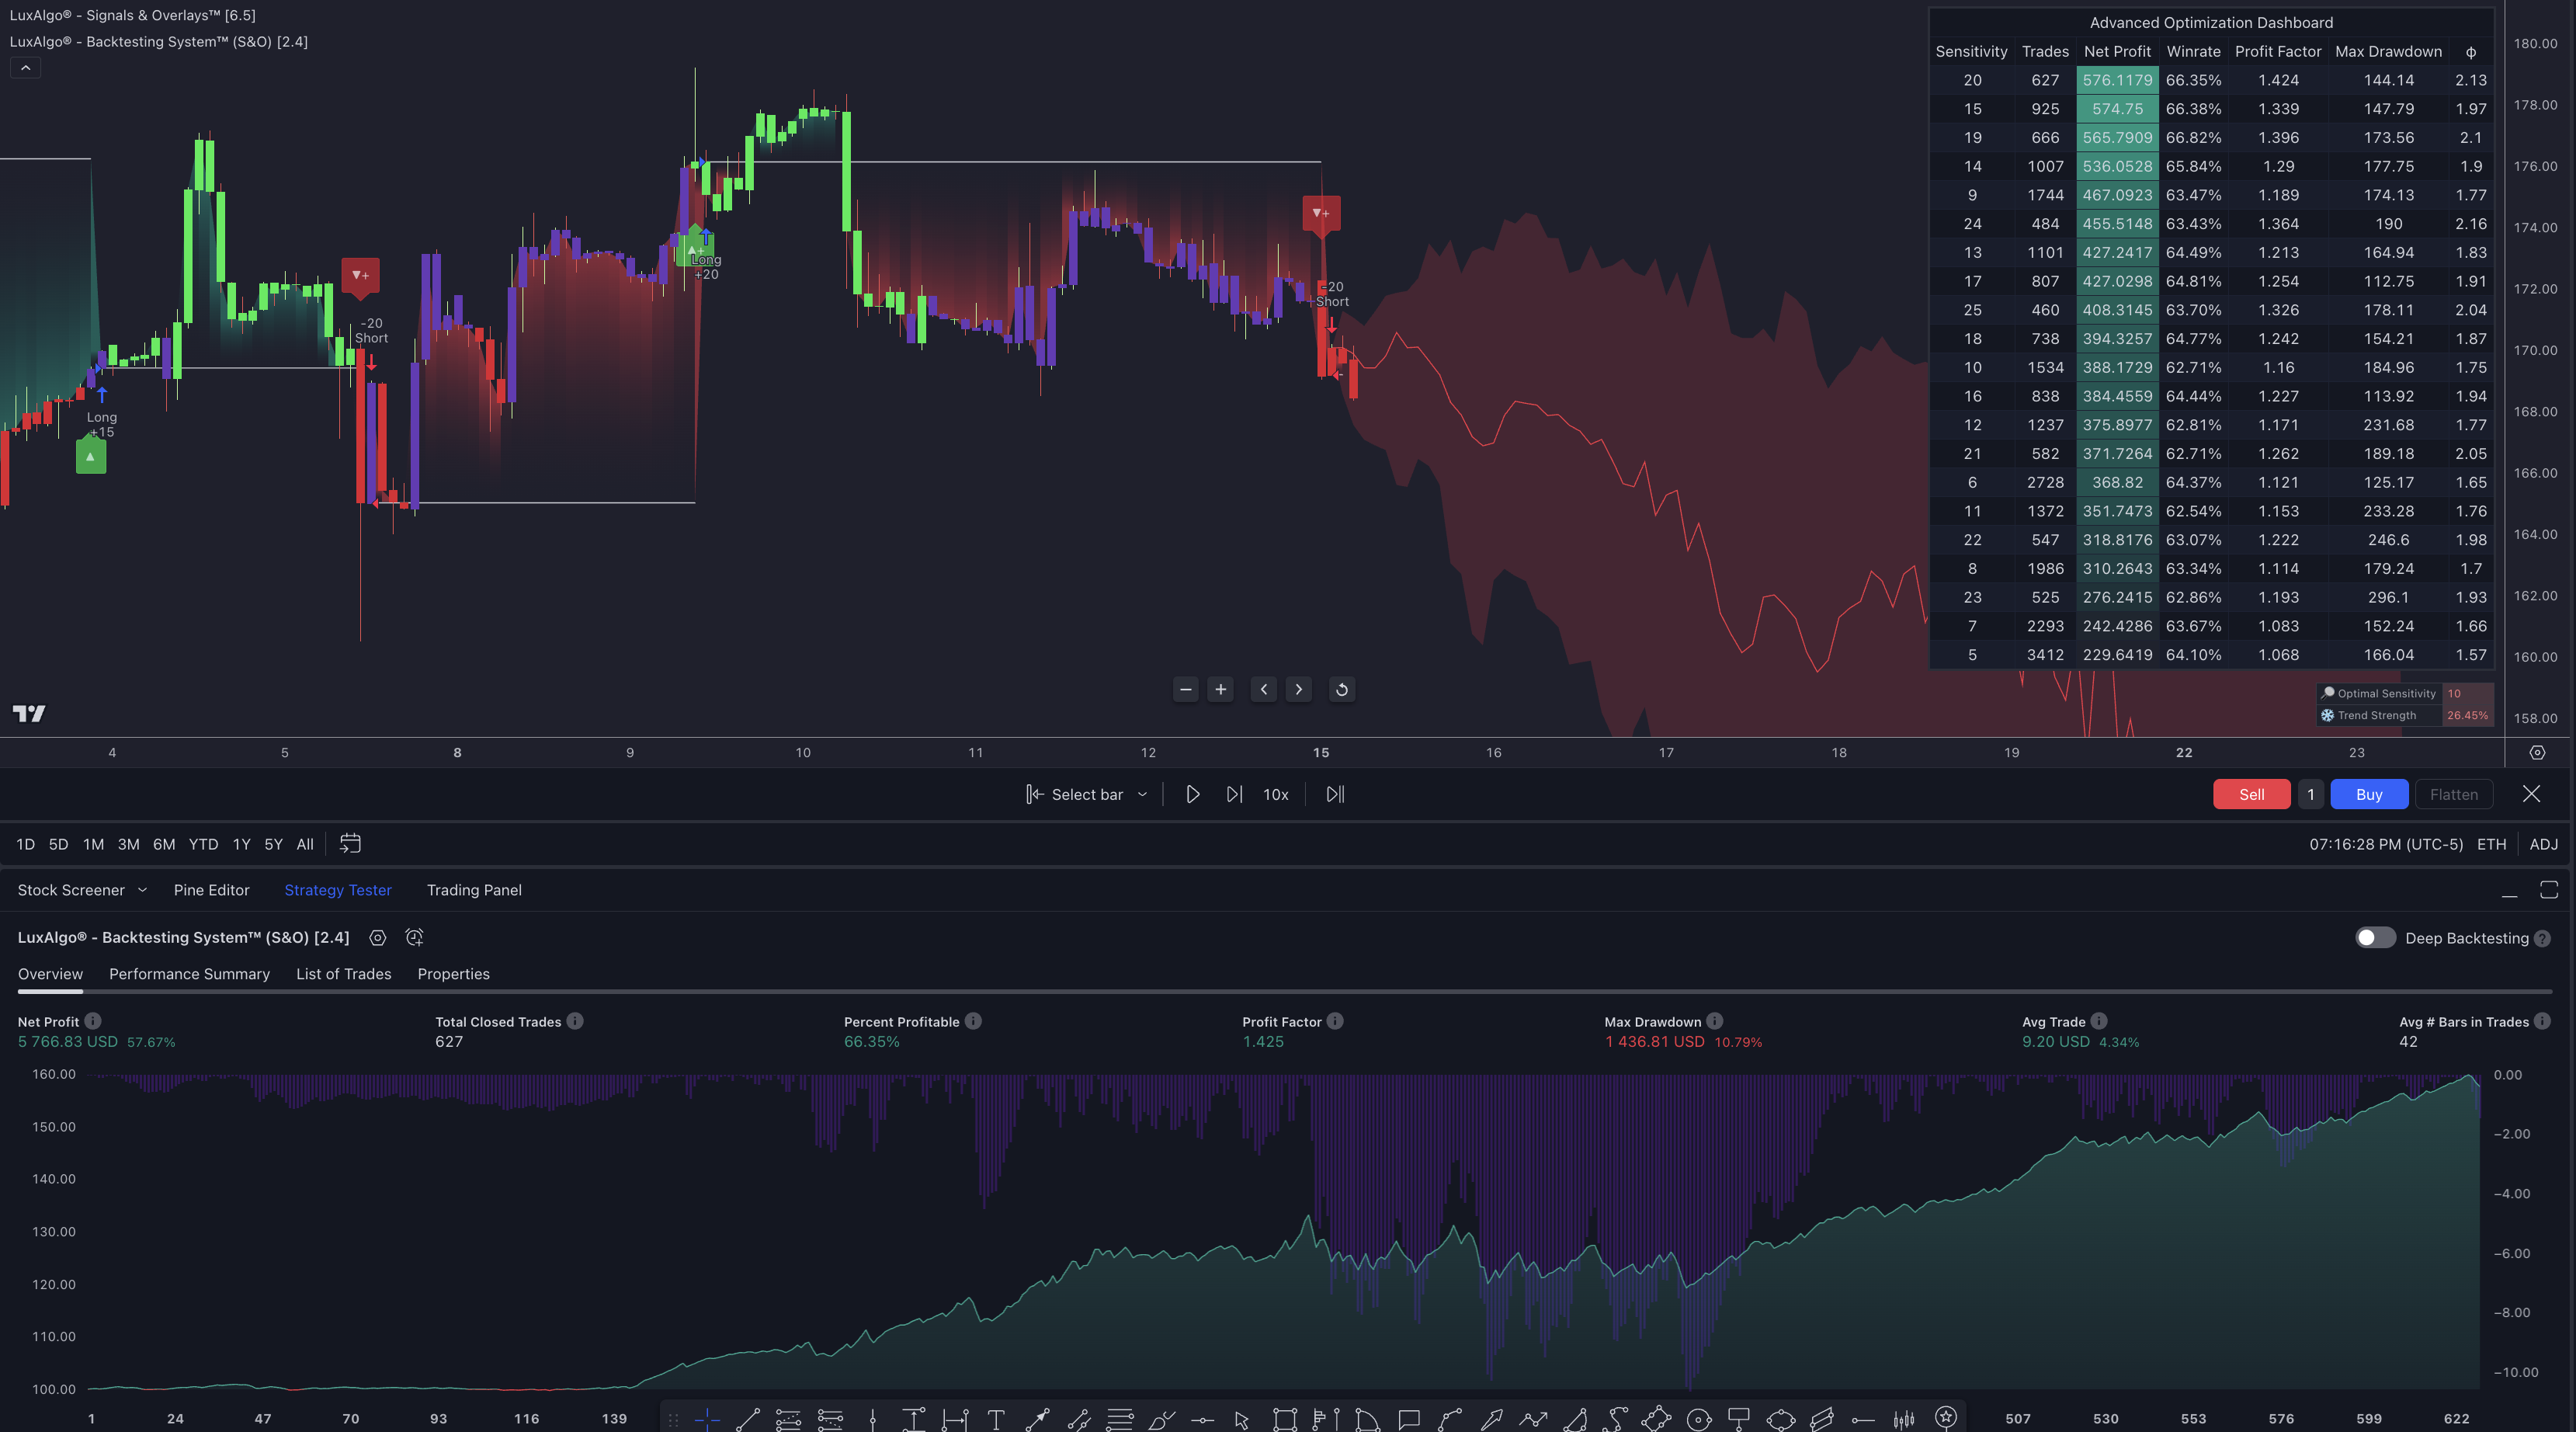 LuxAlgo trading charts showing backtesting with optimization